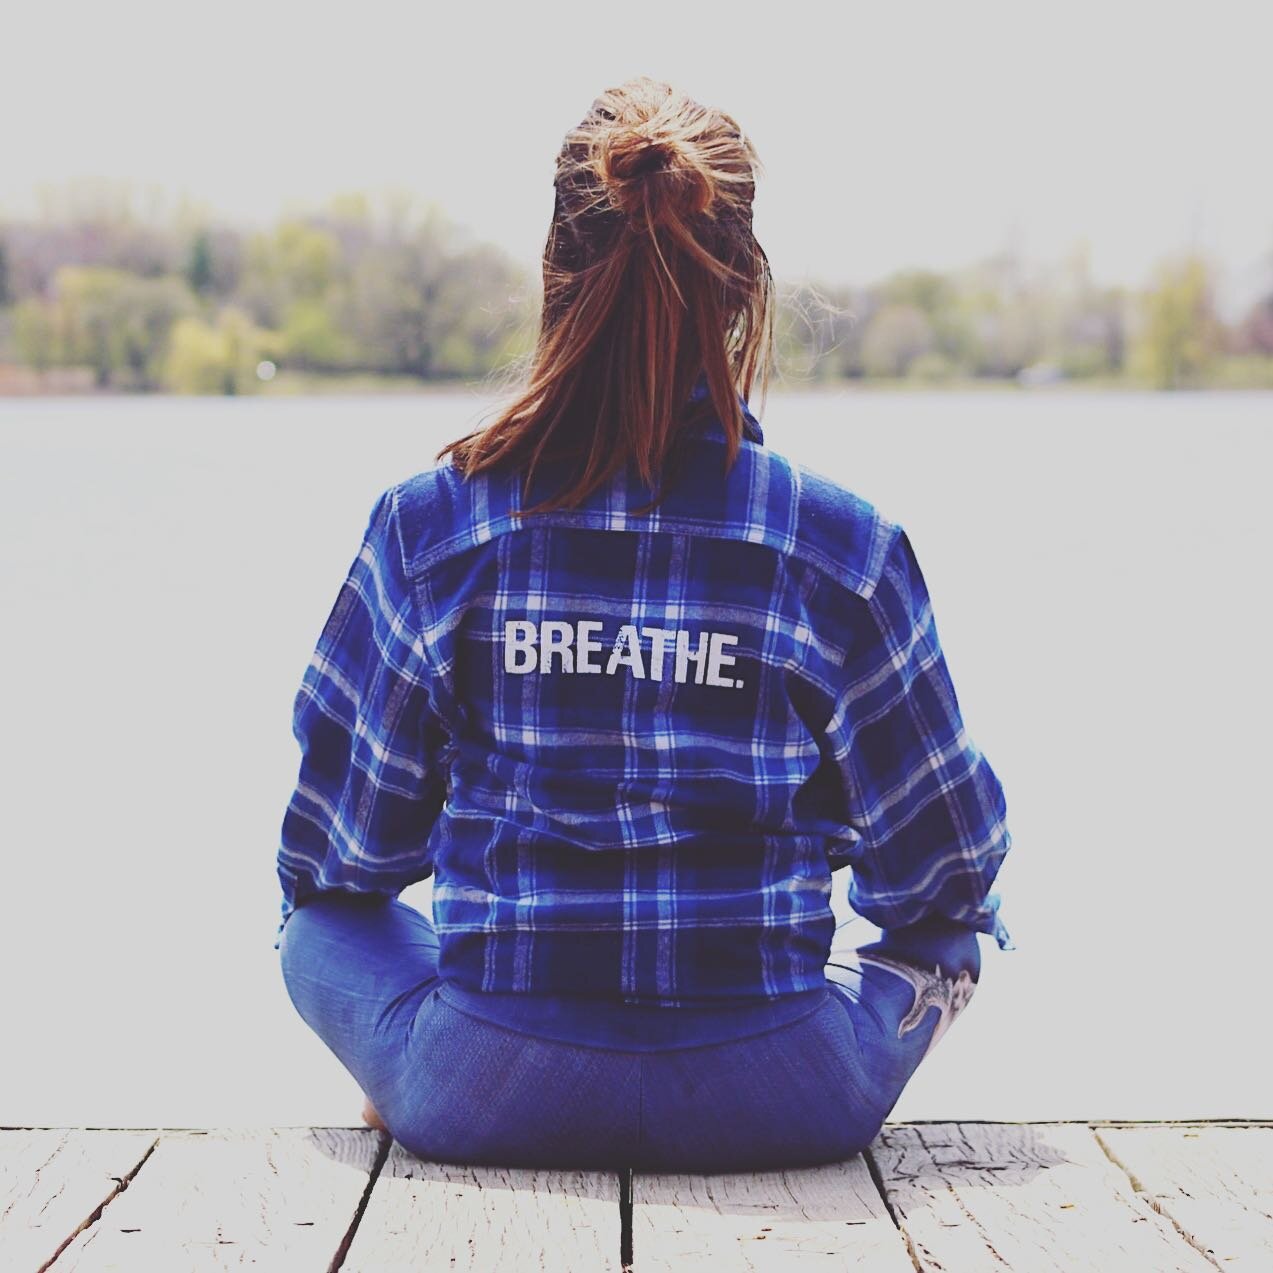 This warm cozy flannel is on SALE!!!! A needed reminder in this anxiety filled experience called Covid-LIFE😳🤪
Go to my website to order yours www.moniquemaxwell.com
Only a few left ❤️😎
#breathe #breatheinbreatheout #onebreathatatime #onedayatatime